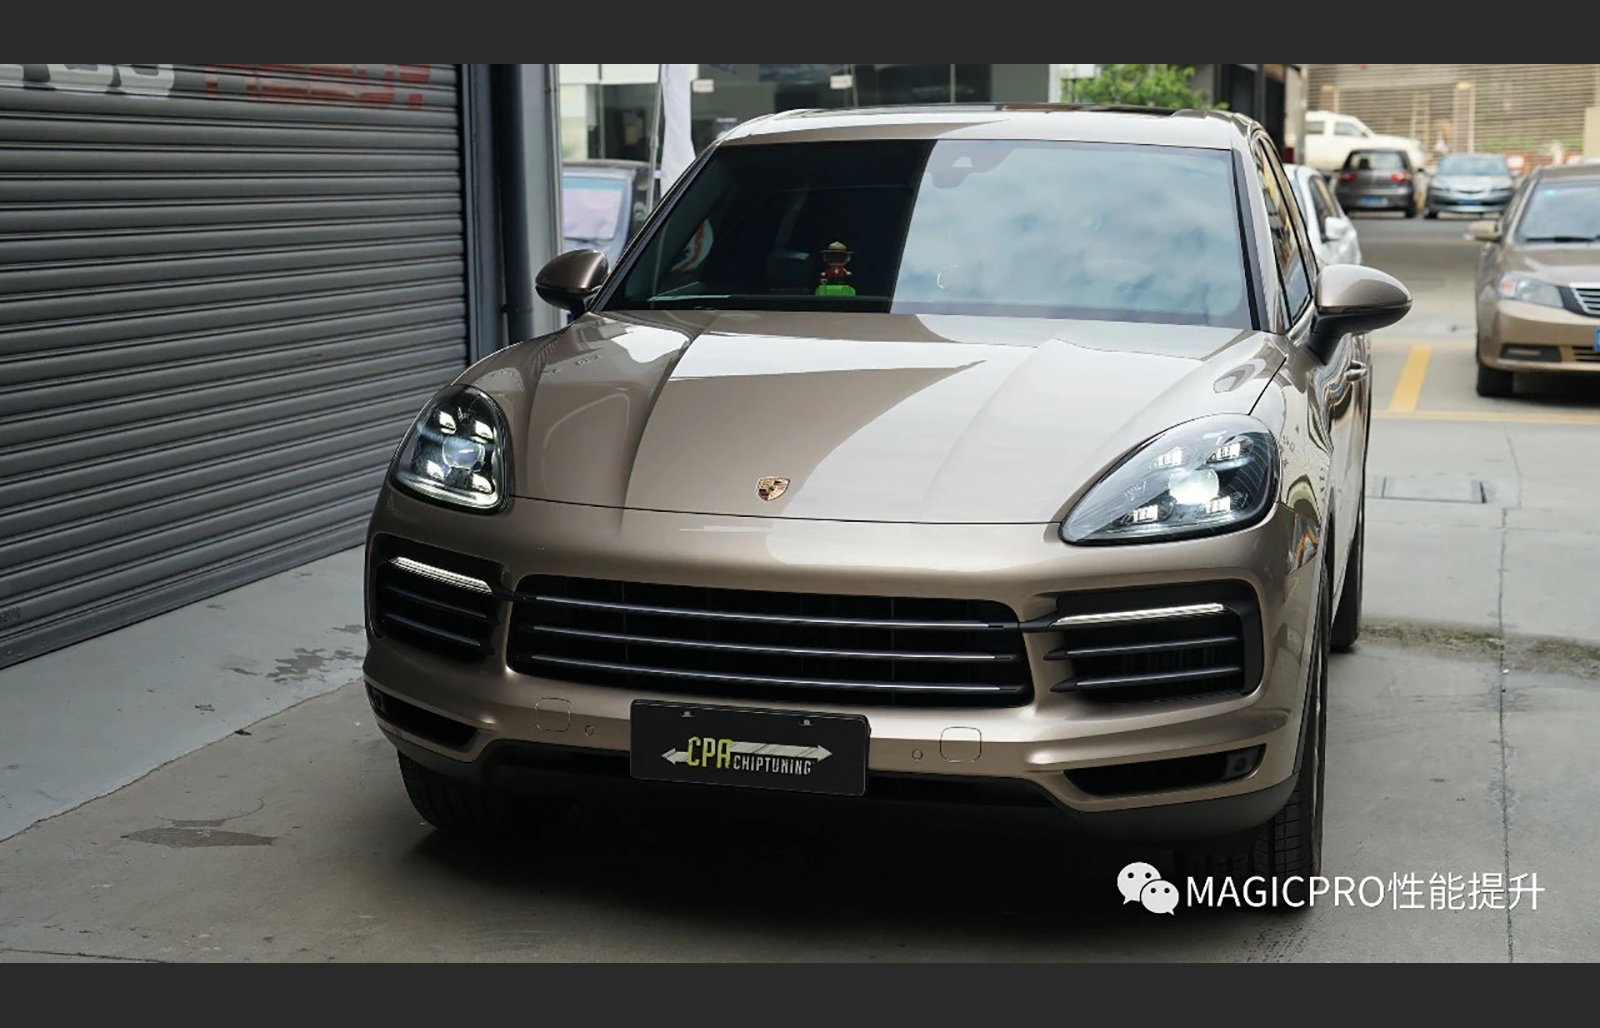 Porsche SUV with CPA chip tuning